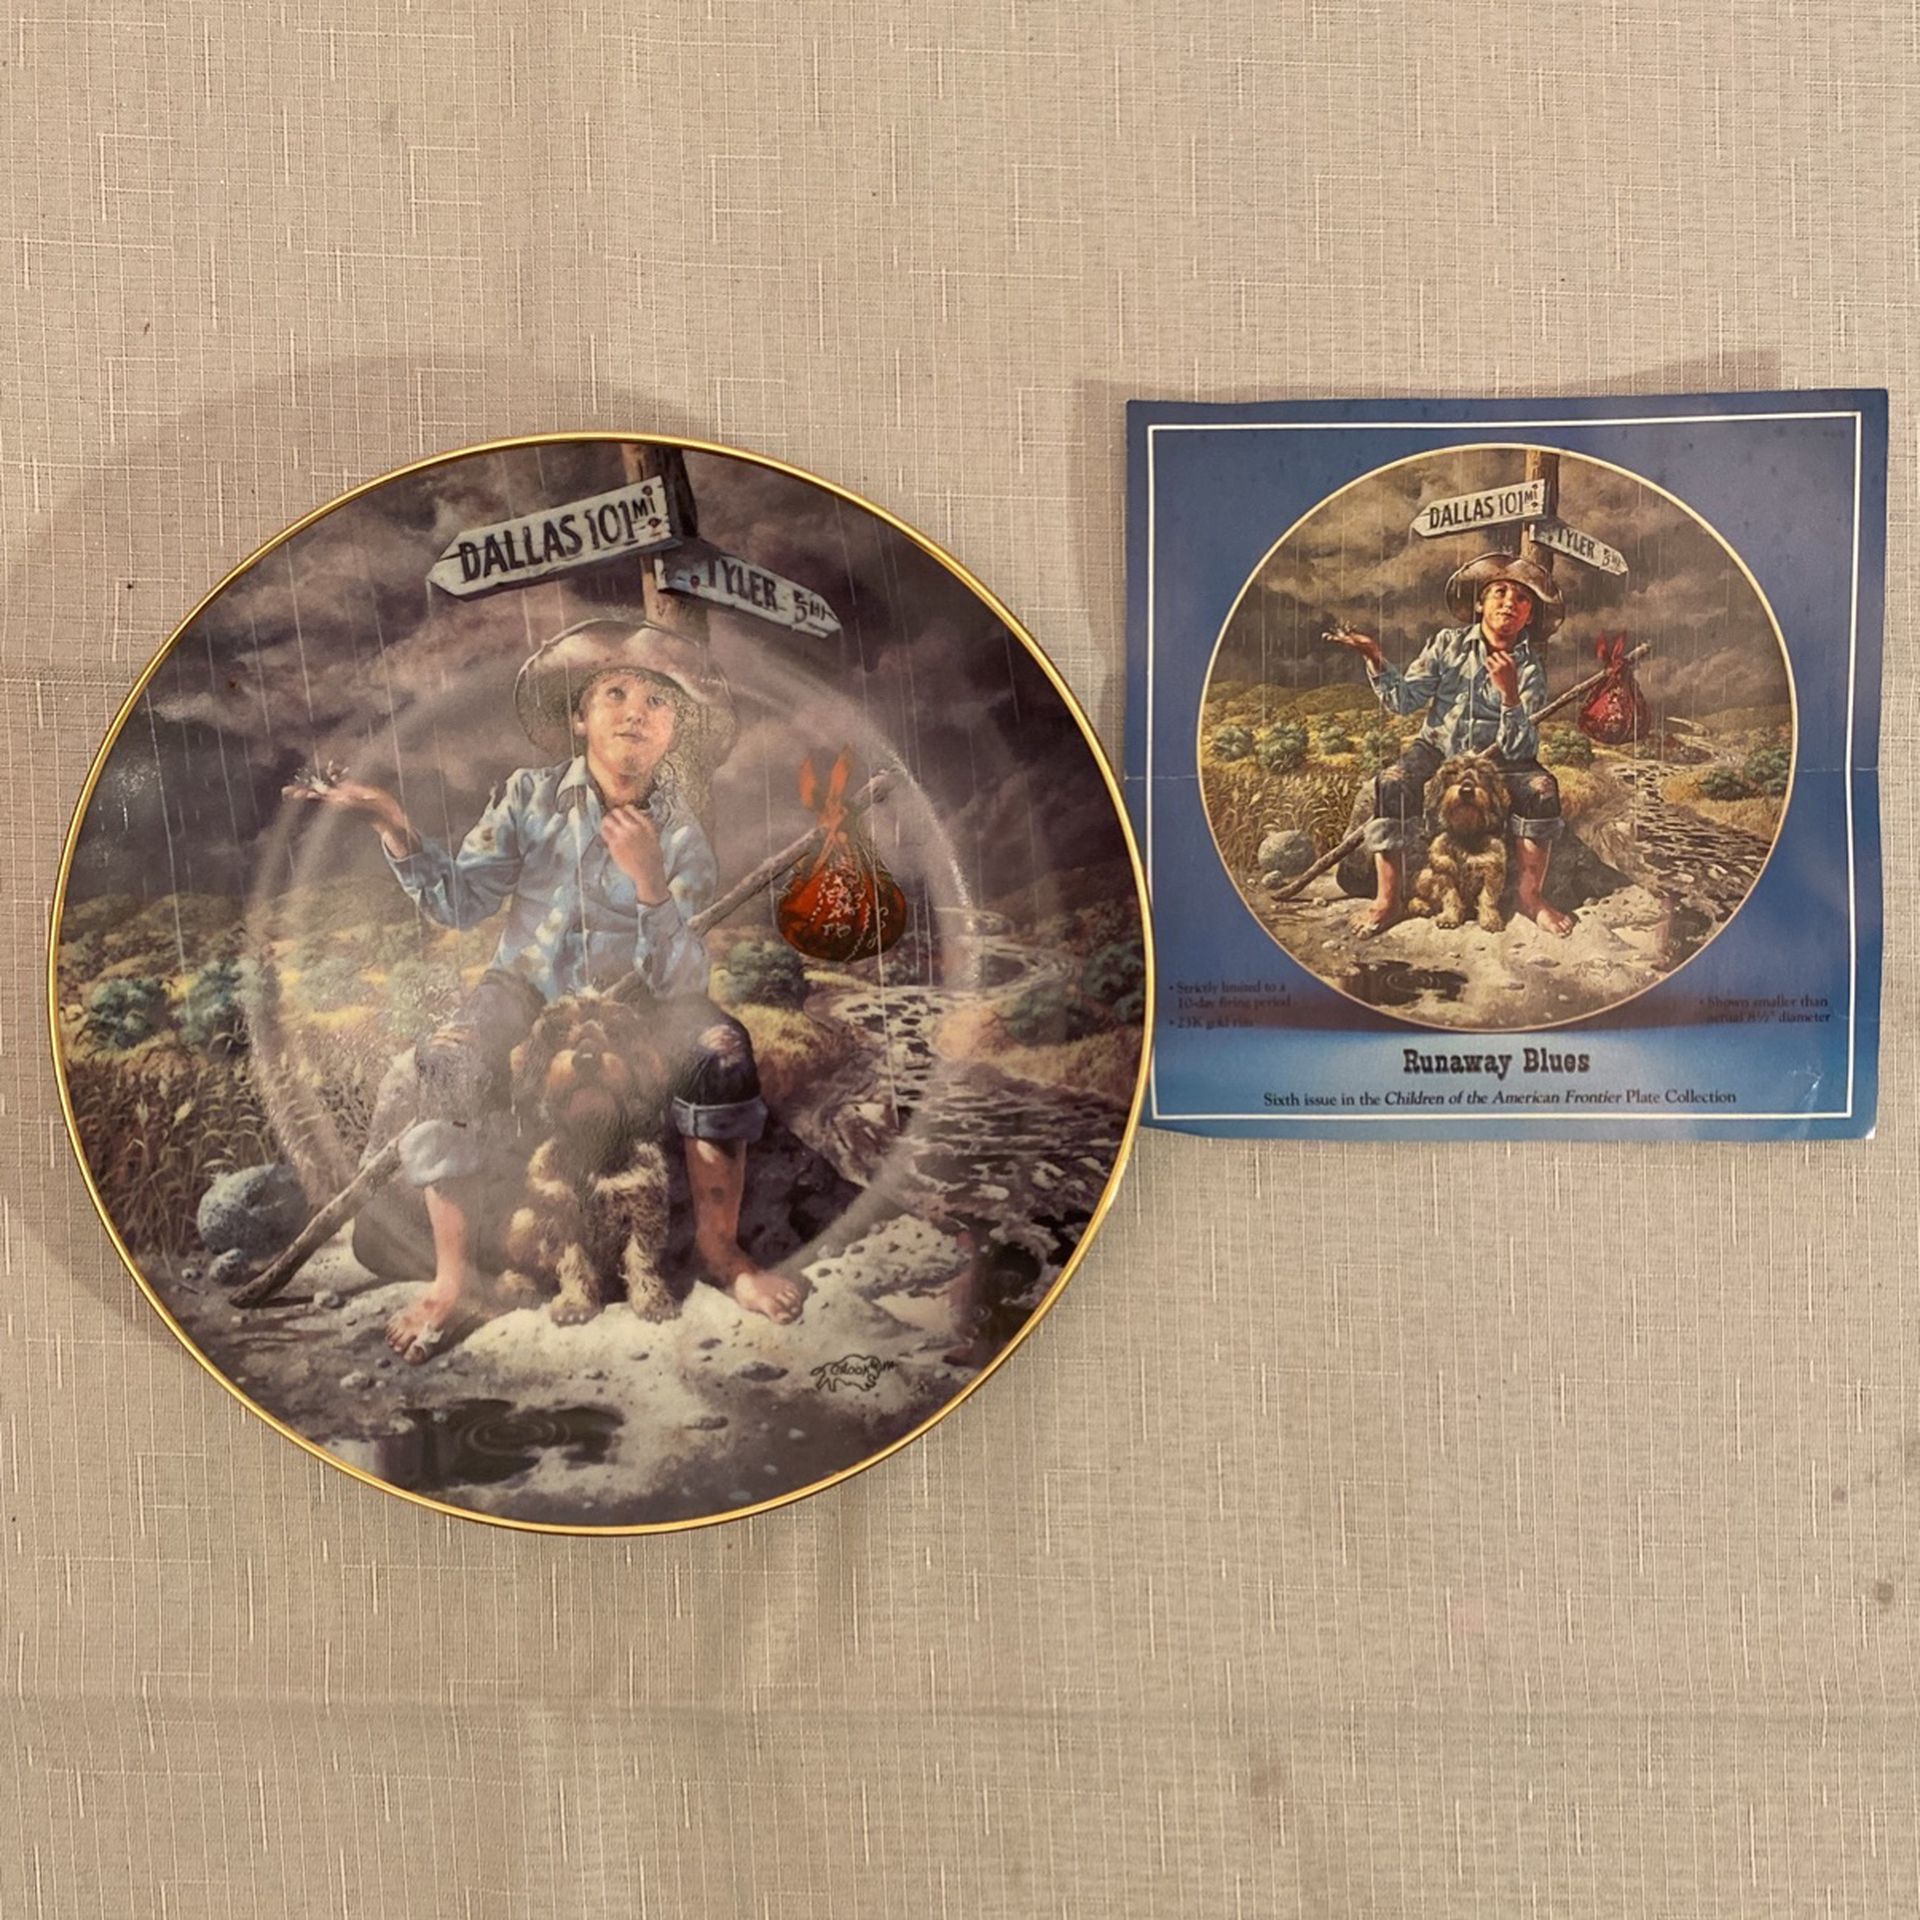 Children of the American frontier Collectors plate